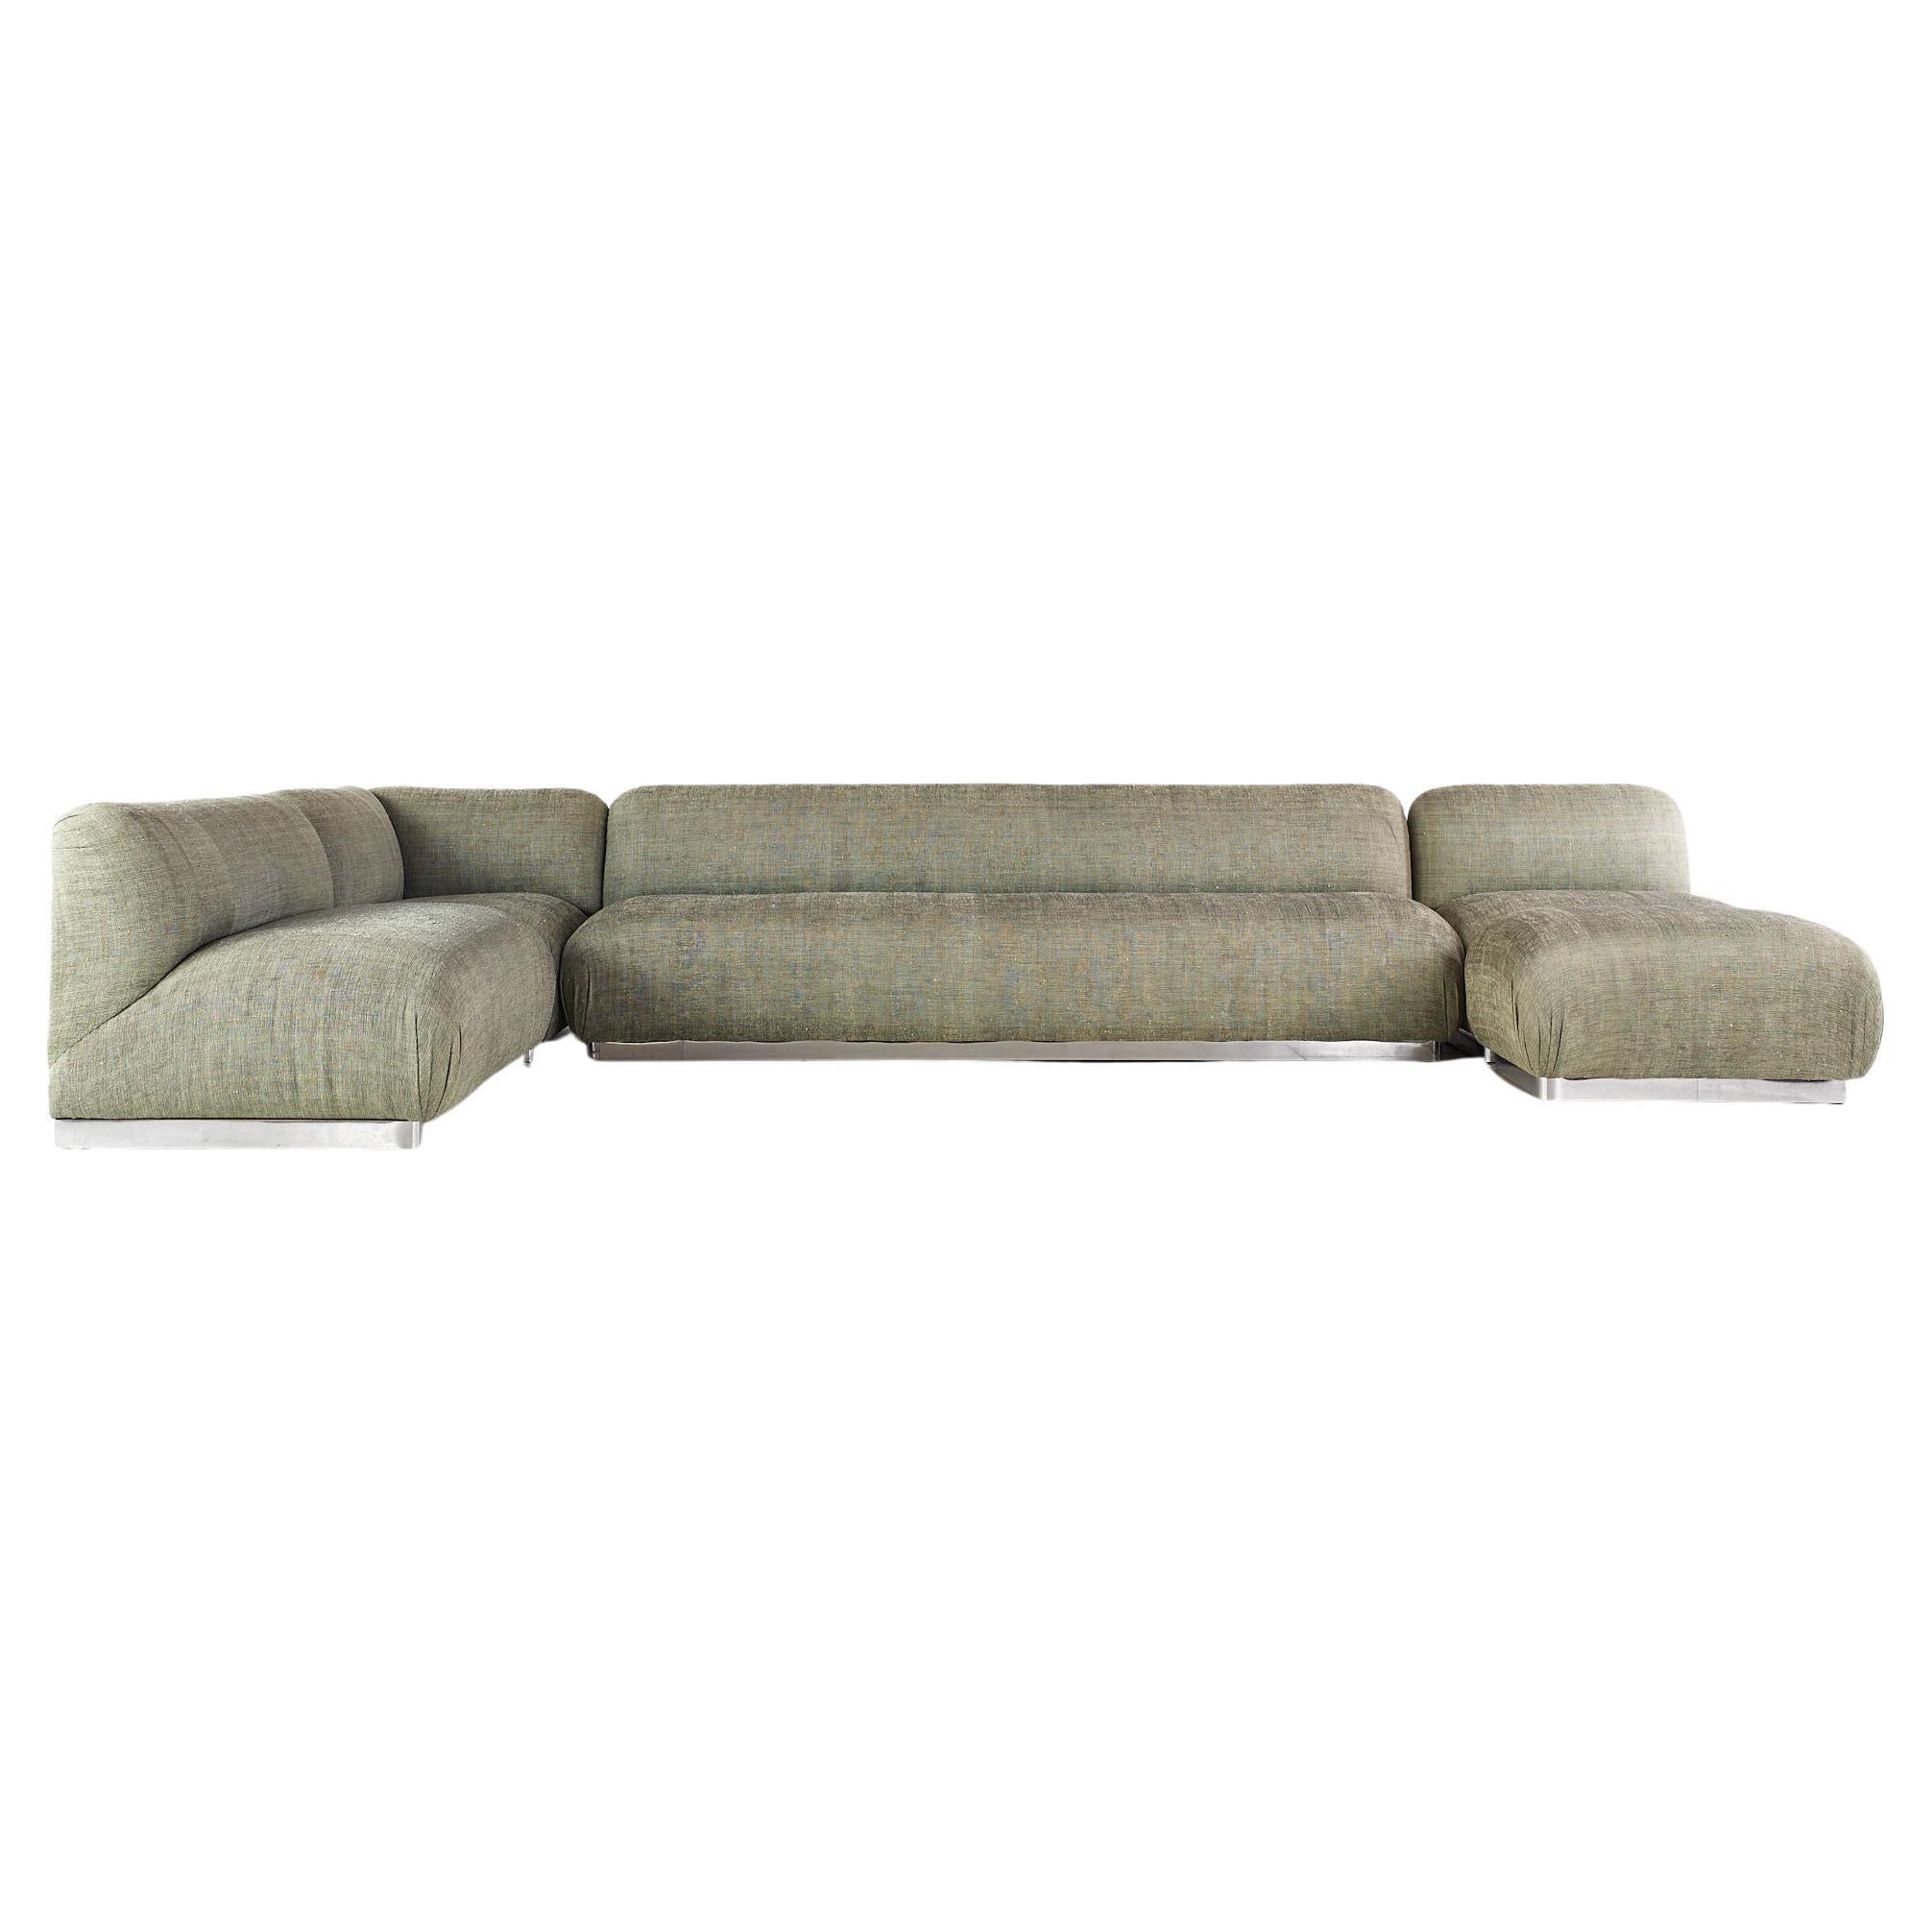 Milo Baughman Style Interior Crafts Chrome Base 5 Piece Sectional Sofa

This sectional sofa measures: 142 wide x  83 deep x  31 inches high, with a seat height of 18 inches

All pieces of furniture can be had in what we call restored vintage